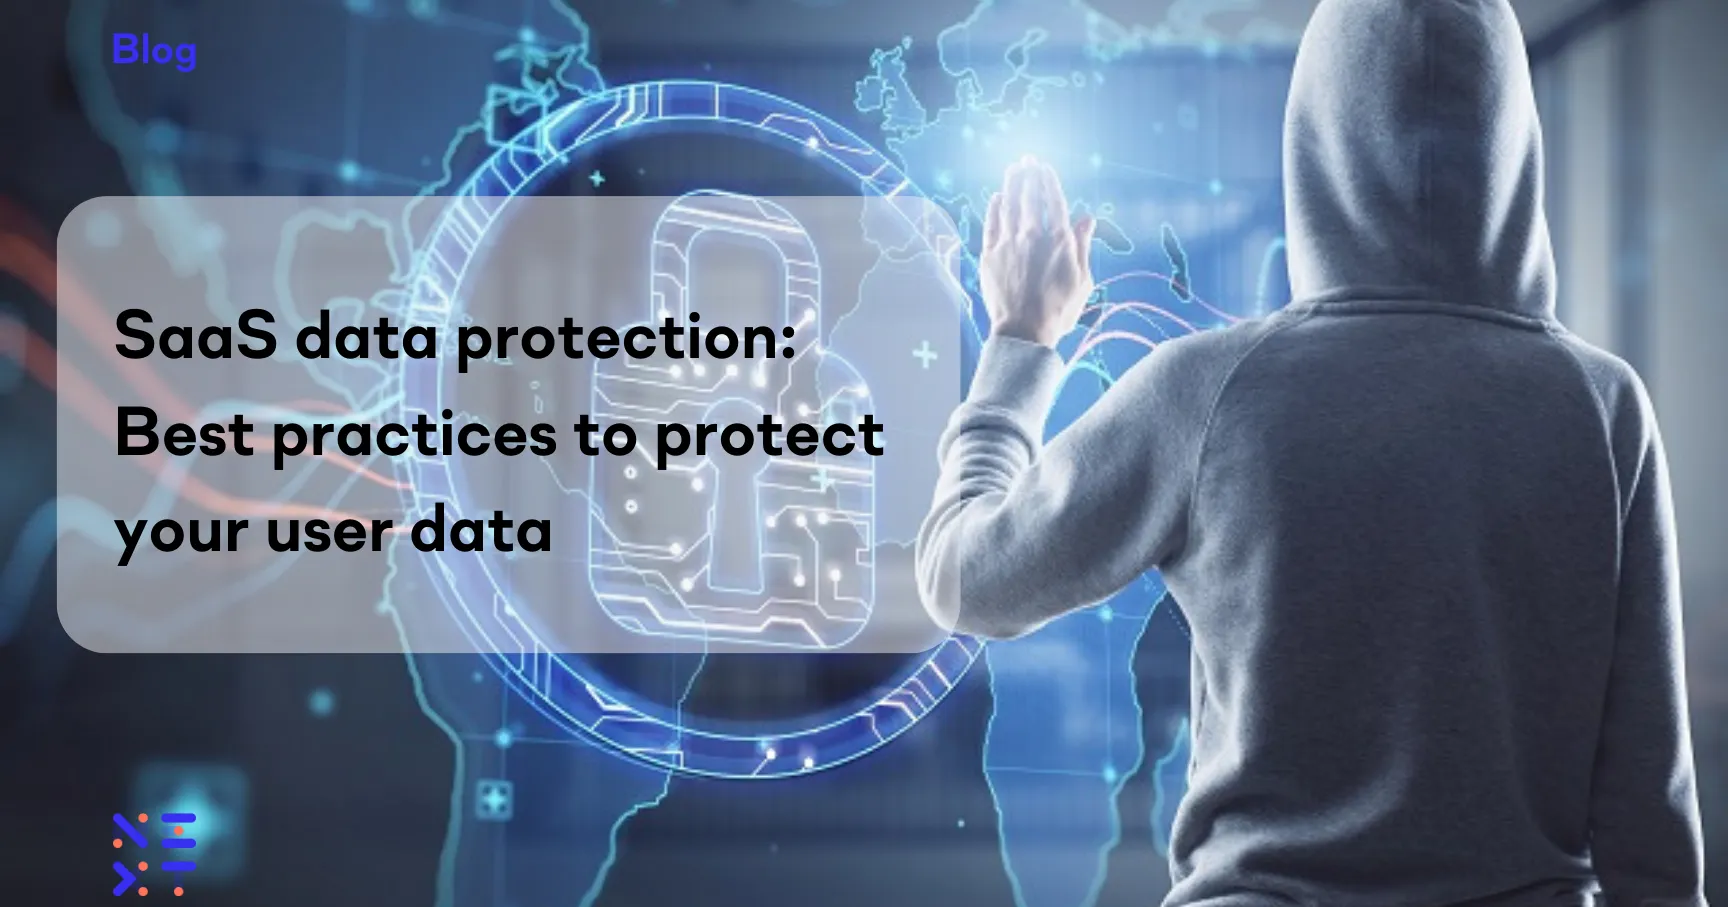 SaaS data protection: Best practices to protect your user data